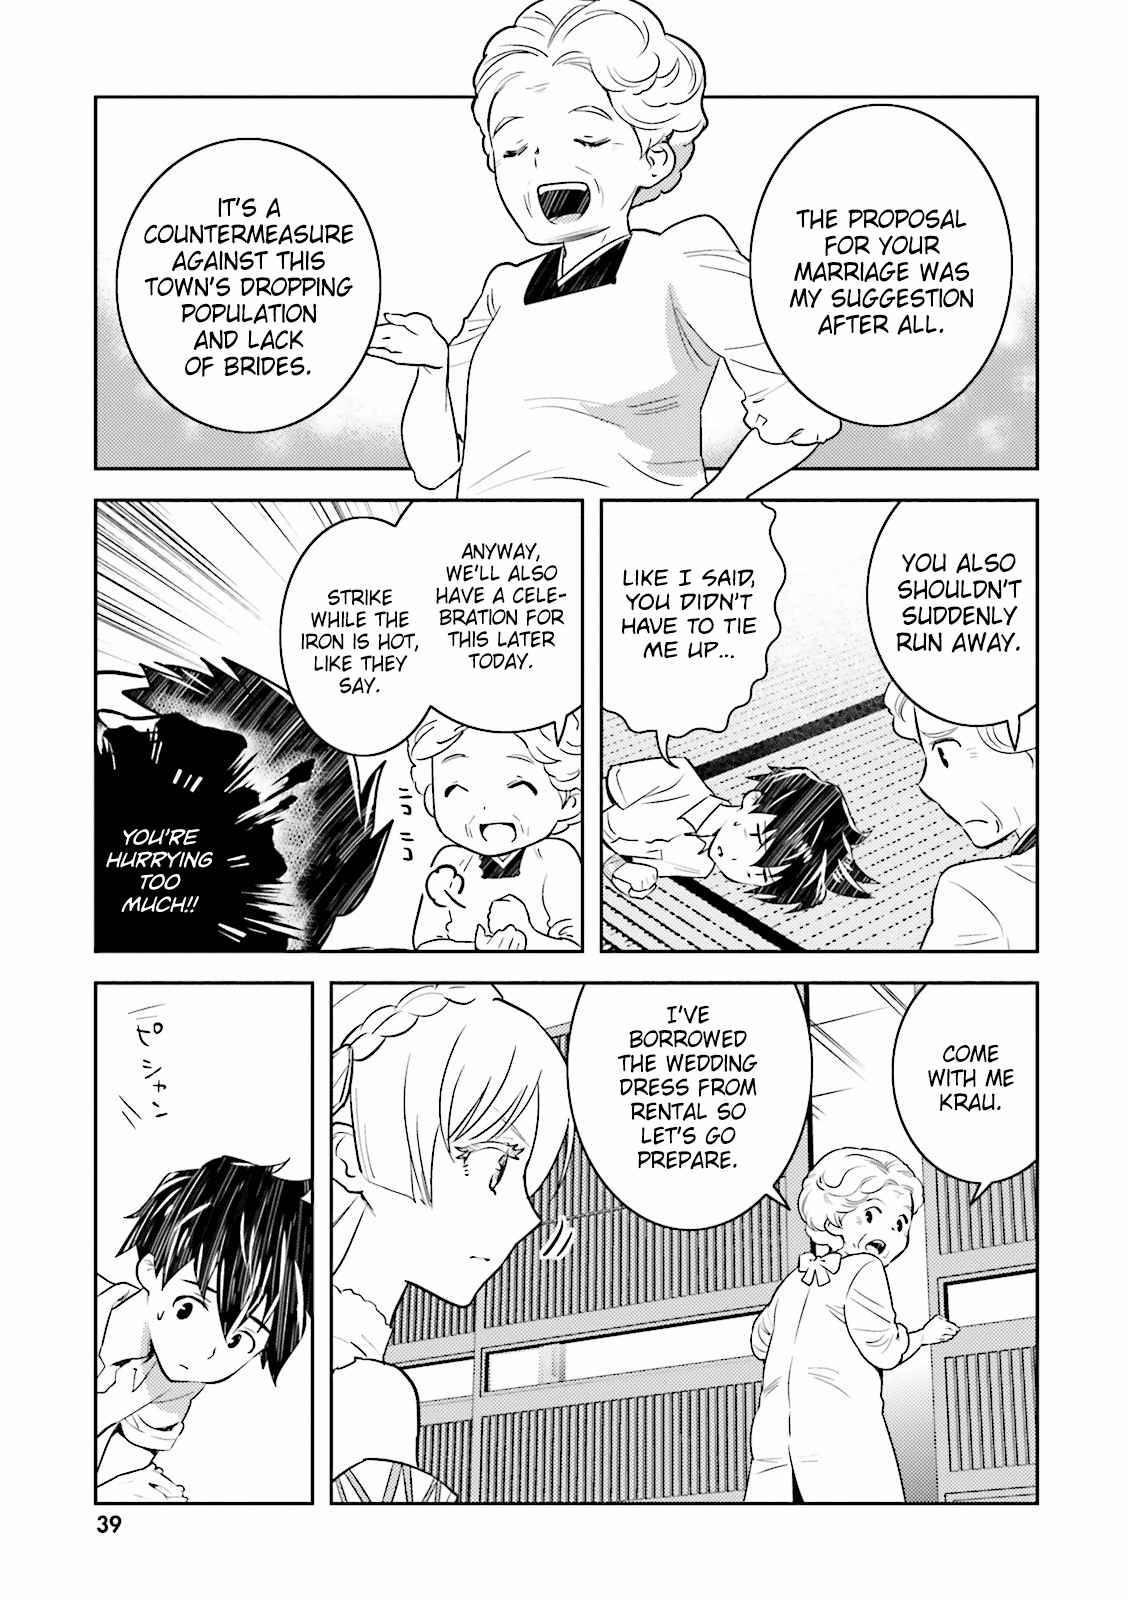 Why not go to JUSCO with me, Valkyrie? Vol. 1 Ch. 3